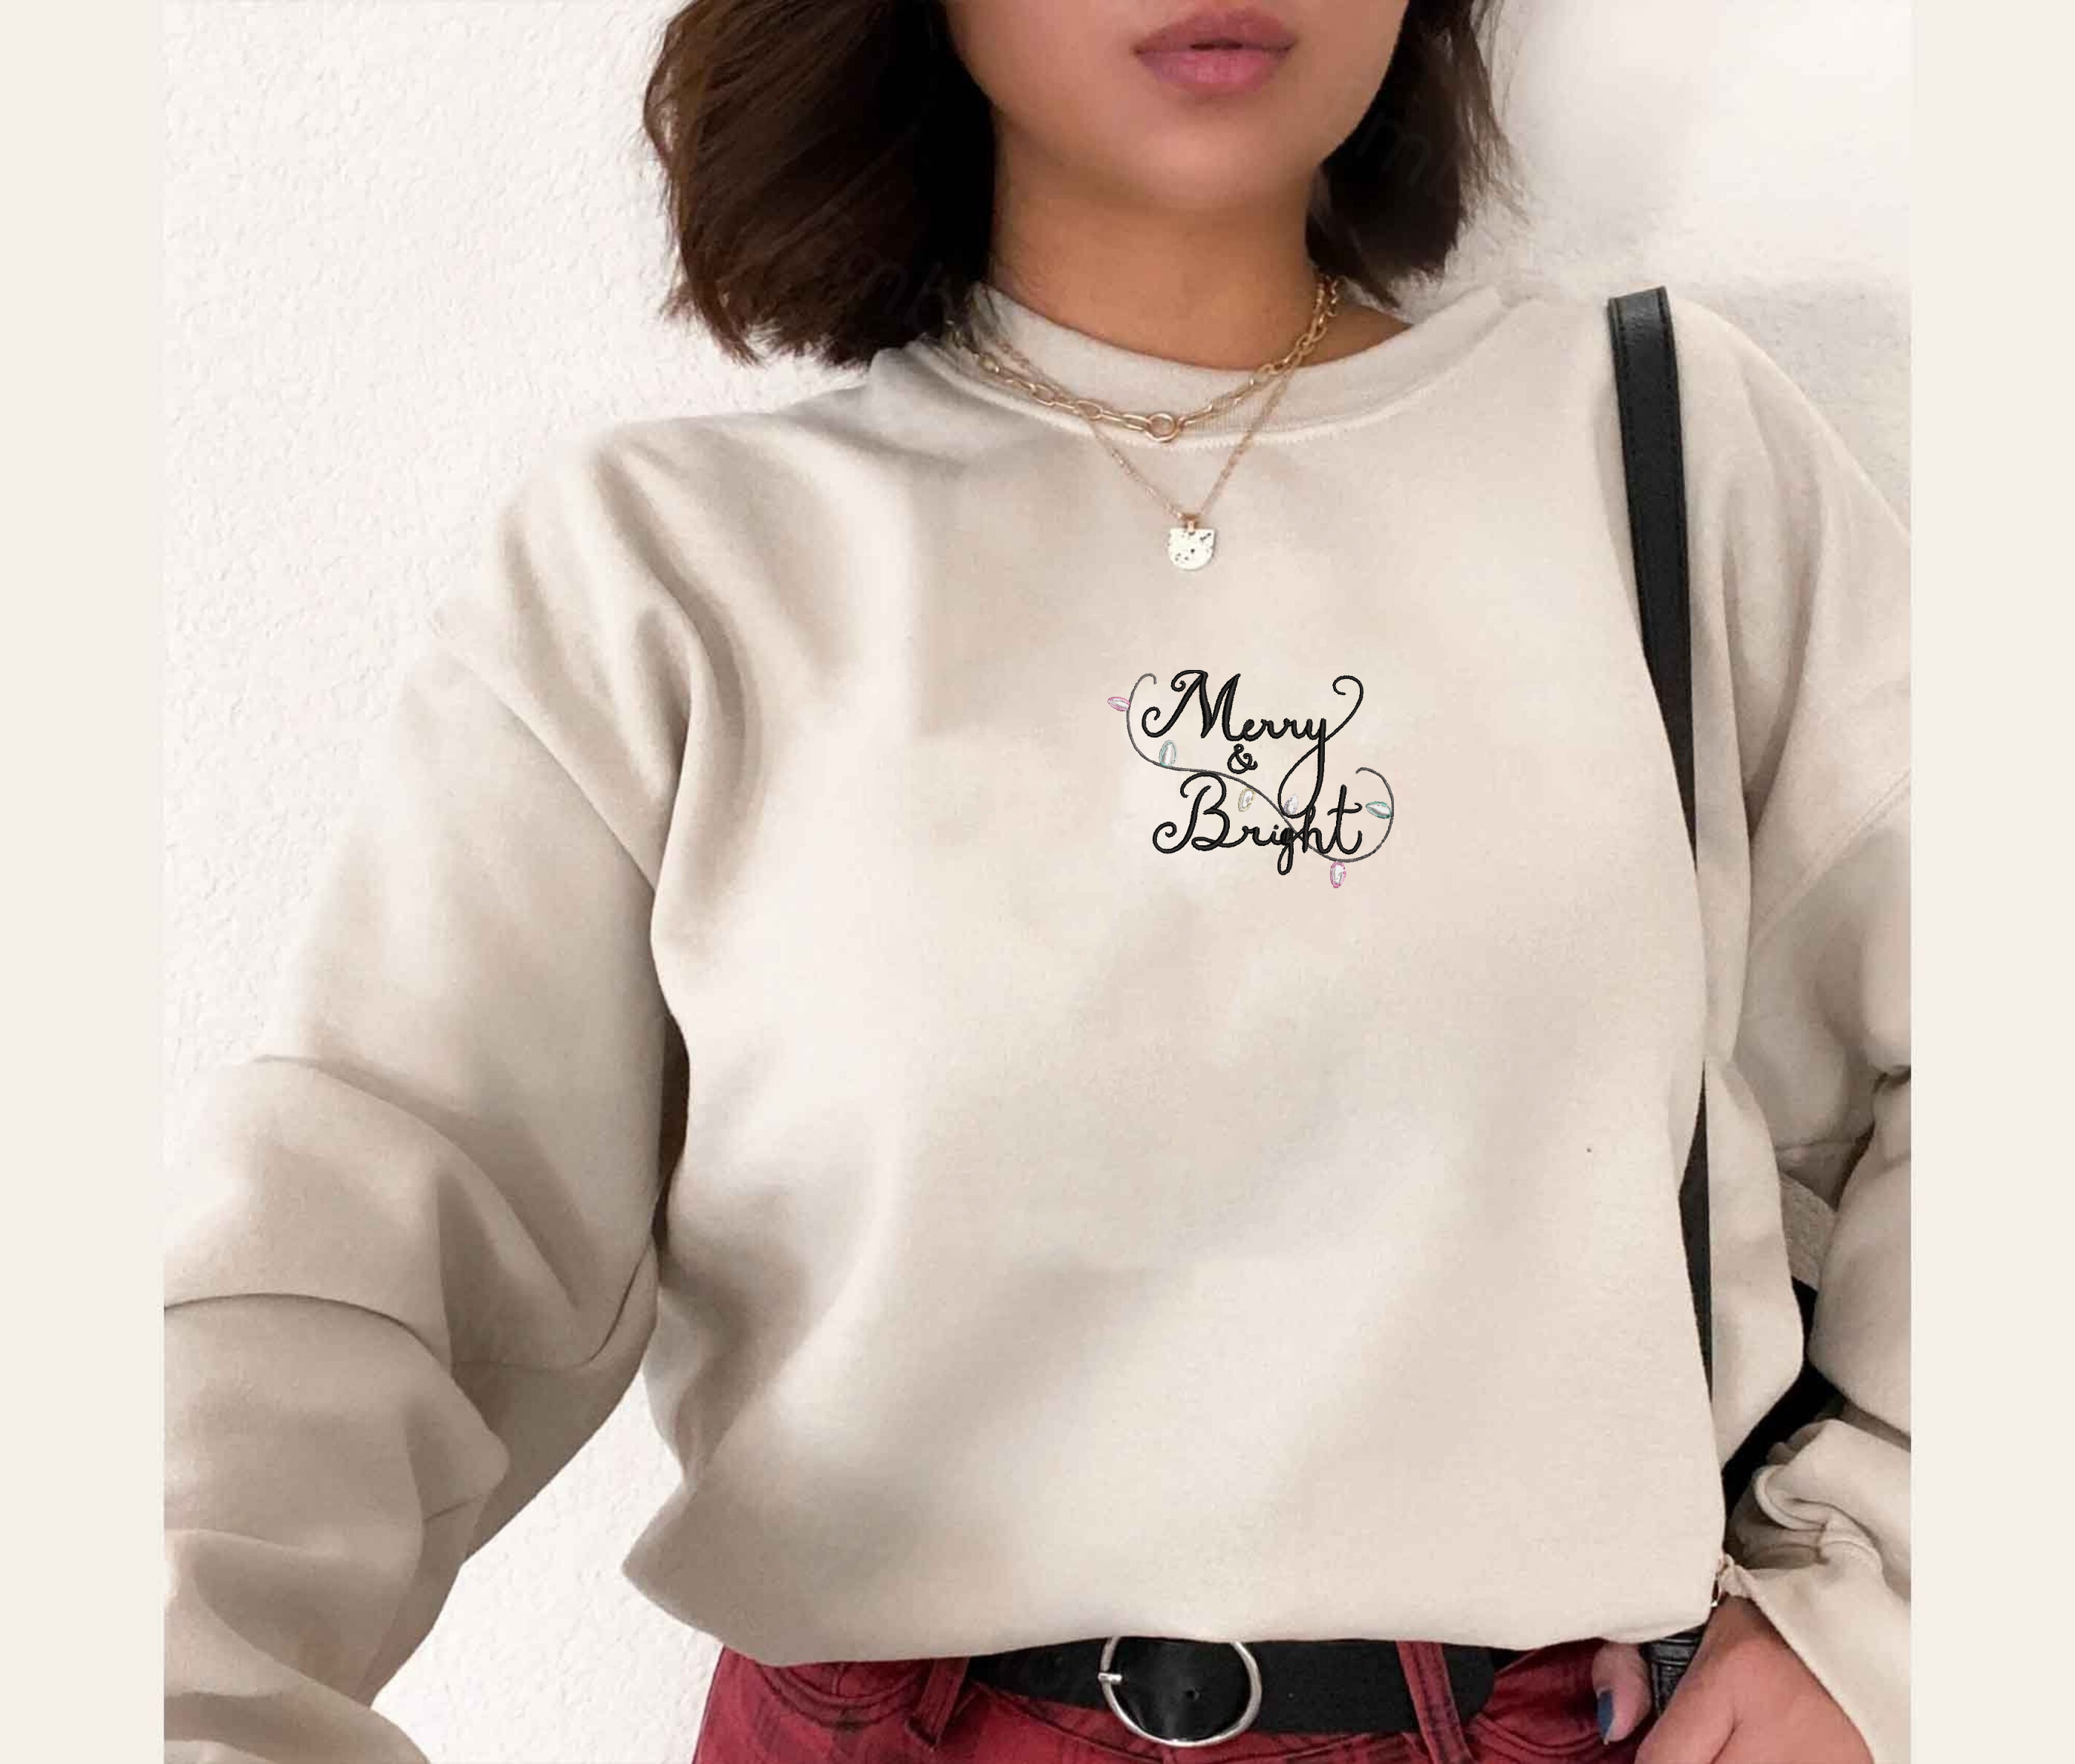 & Hoodie Embroly Sweatshirt, Merry Christmas Bright Embroidered -